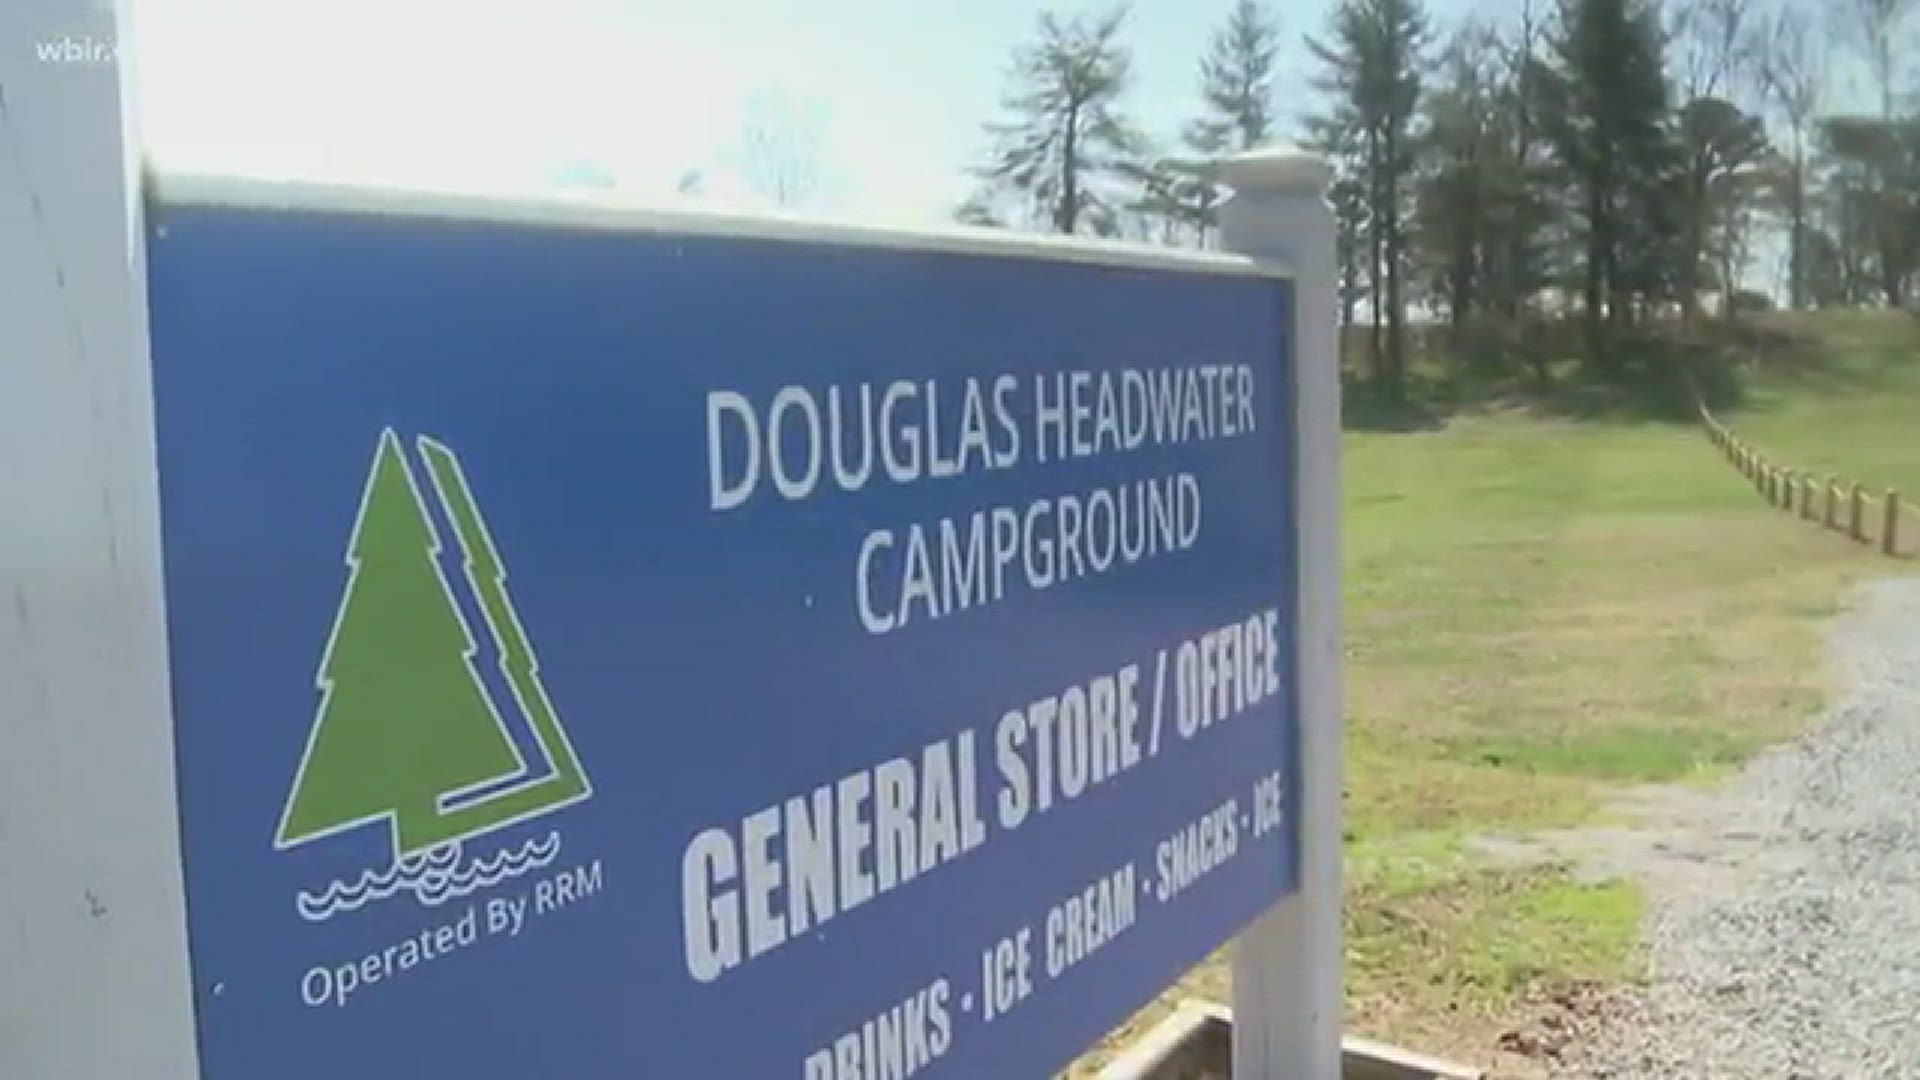 March 15, 2018: Rick and Connie Odle first stayed at Douglas Dam campground in 2015 for a vacation, then they decided to take over the campground caretakers.